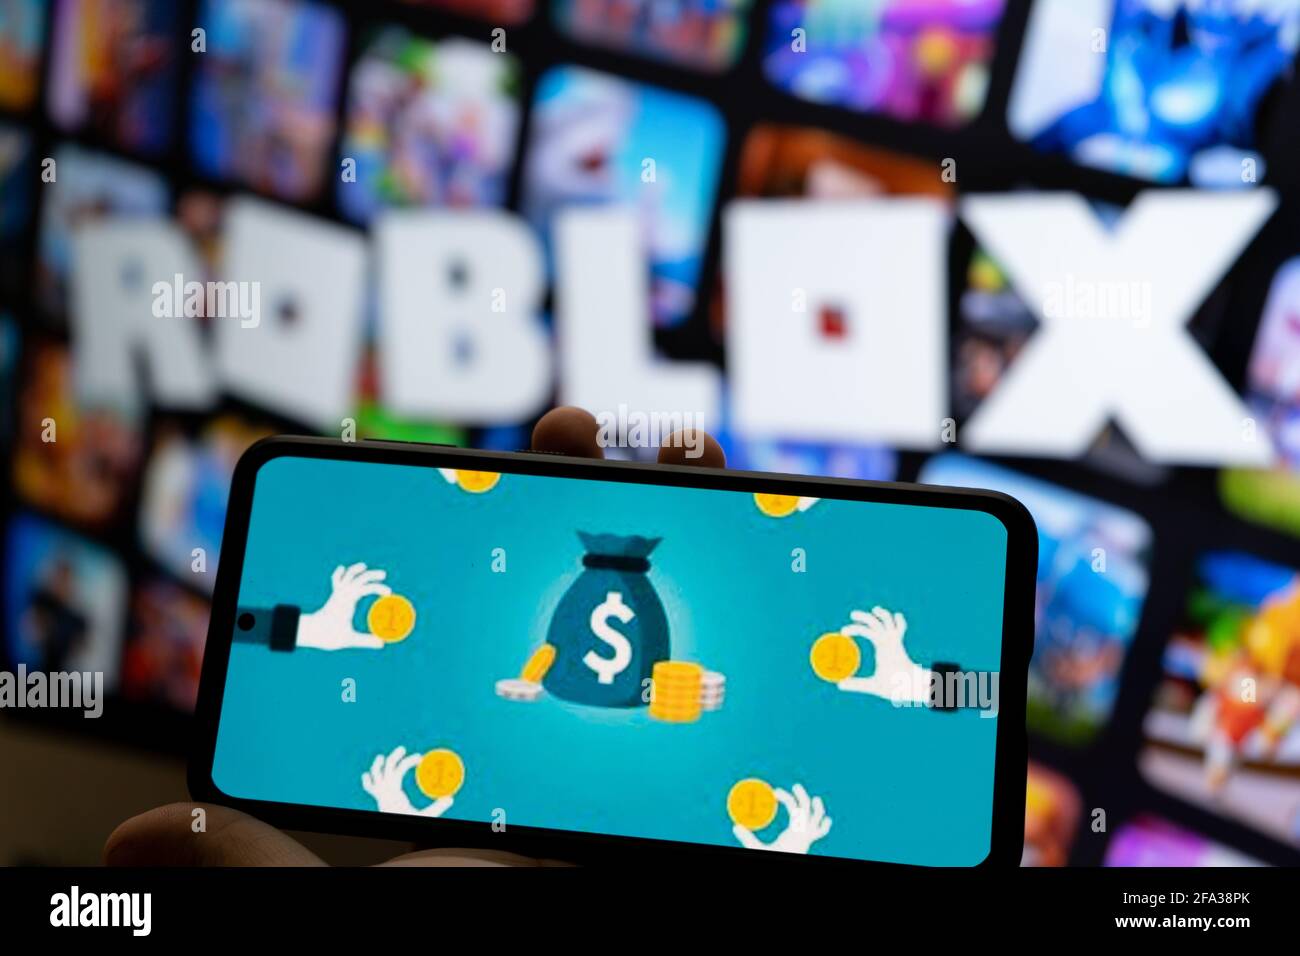 Roblox Game App On Smartphone Screen Stock Photo 1997154221